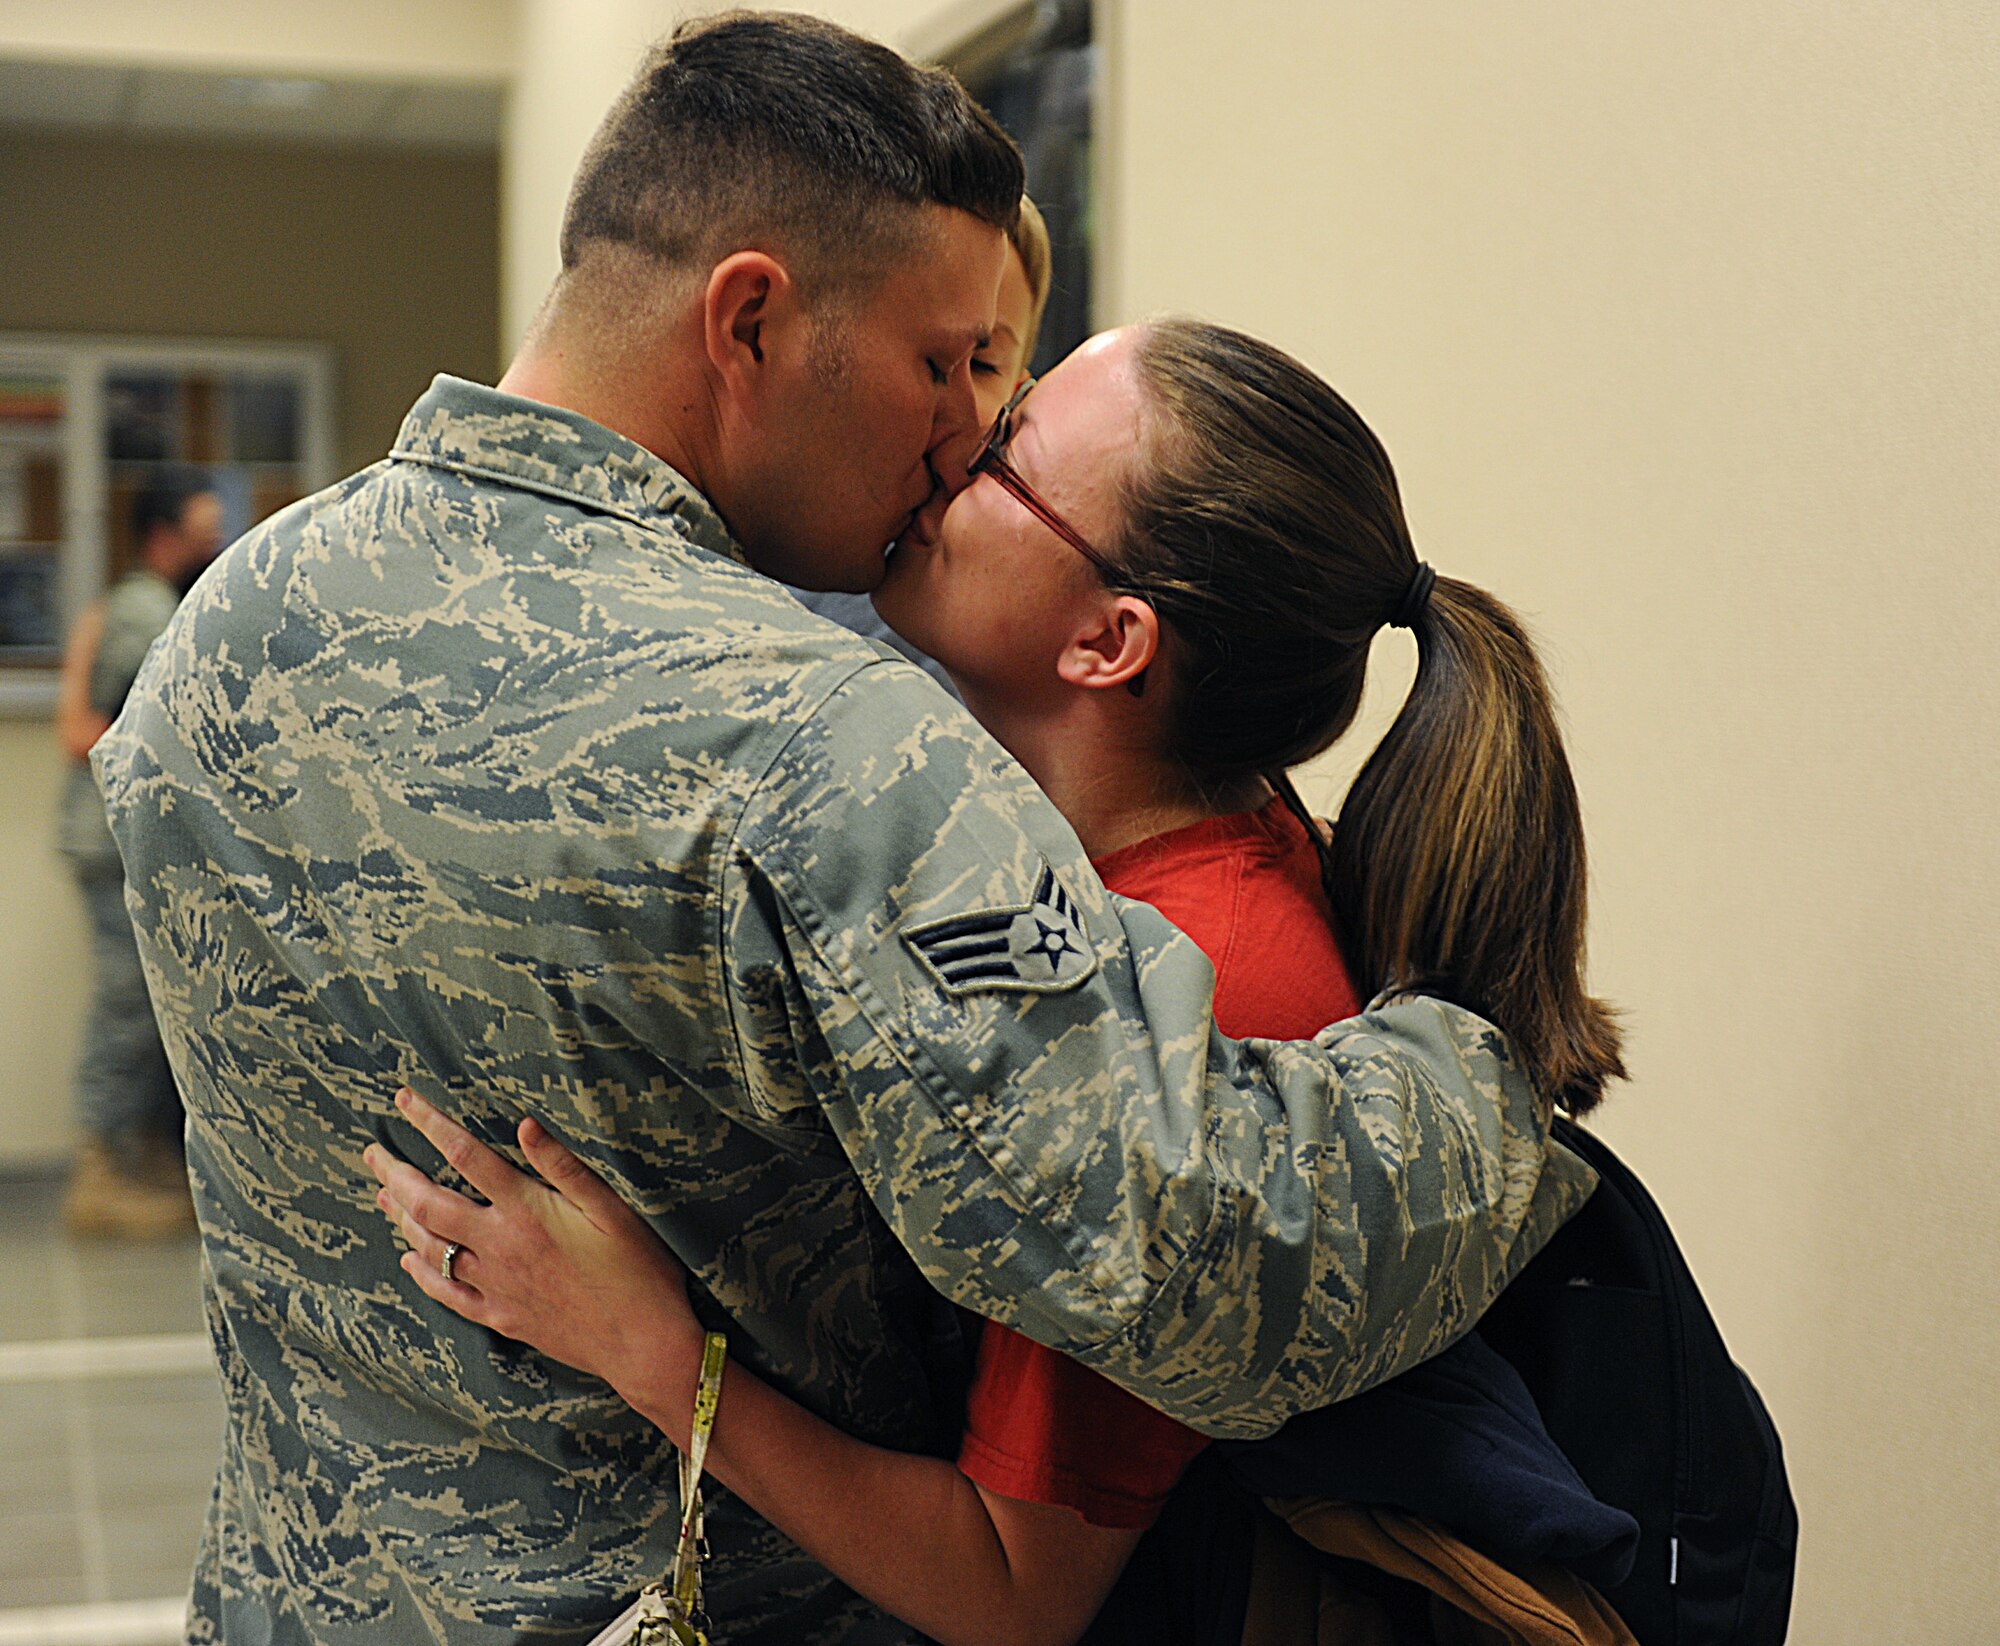 Senior Airman James Nunley, 19th Aircraft Maintenance Squadron electronic warfare journeyman, kisses his wife, Lindsey, as he prepares to depart to Southwest Asia May 7.  The group was the last of the deployment push that saw nearly 20 C-130 aircraft and 1,000 Airmen leave for their deployments in the wake of the April 25 tornado rated an EF-2 on the Enhanced Fujita Scale (111 to 135 mph) that struck the base. (U.S. Air Force photo by Airman 1st Class Ellora Stewart) 